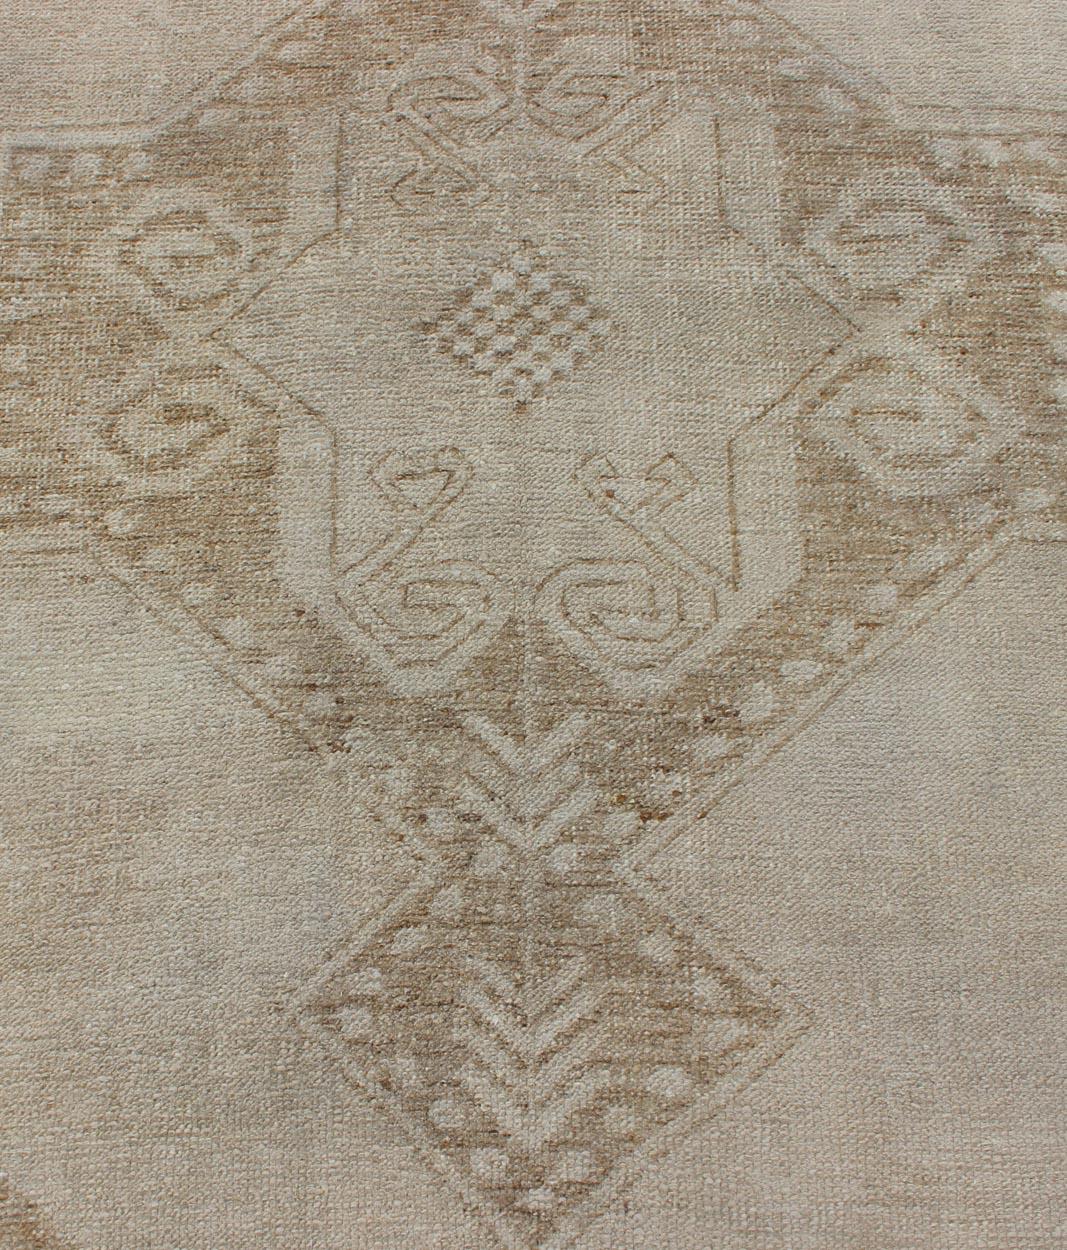 Vintage Turkish Oushak Runner with Medallions in Taupe, Tan, and Browns For Sale 1